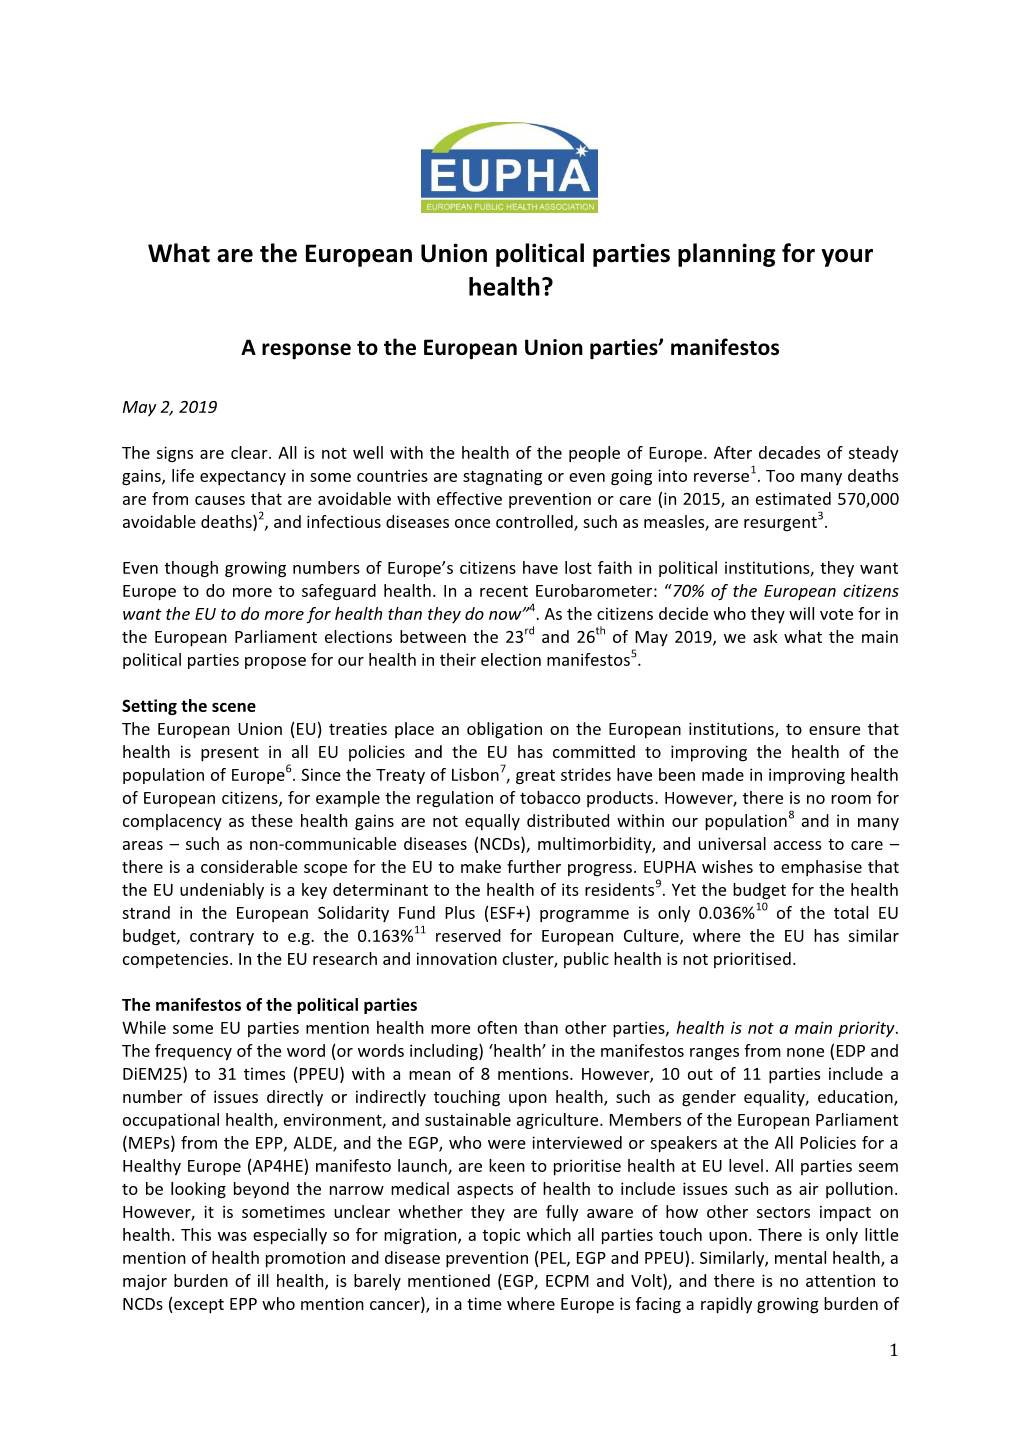 What Are the European Union Political Parties Planning for Your Health?